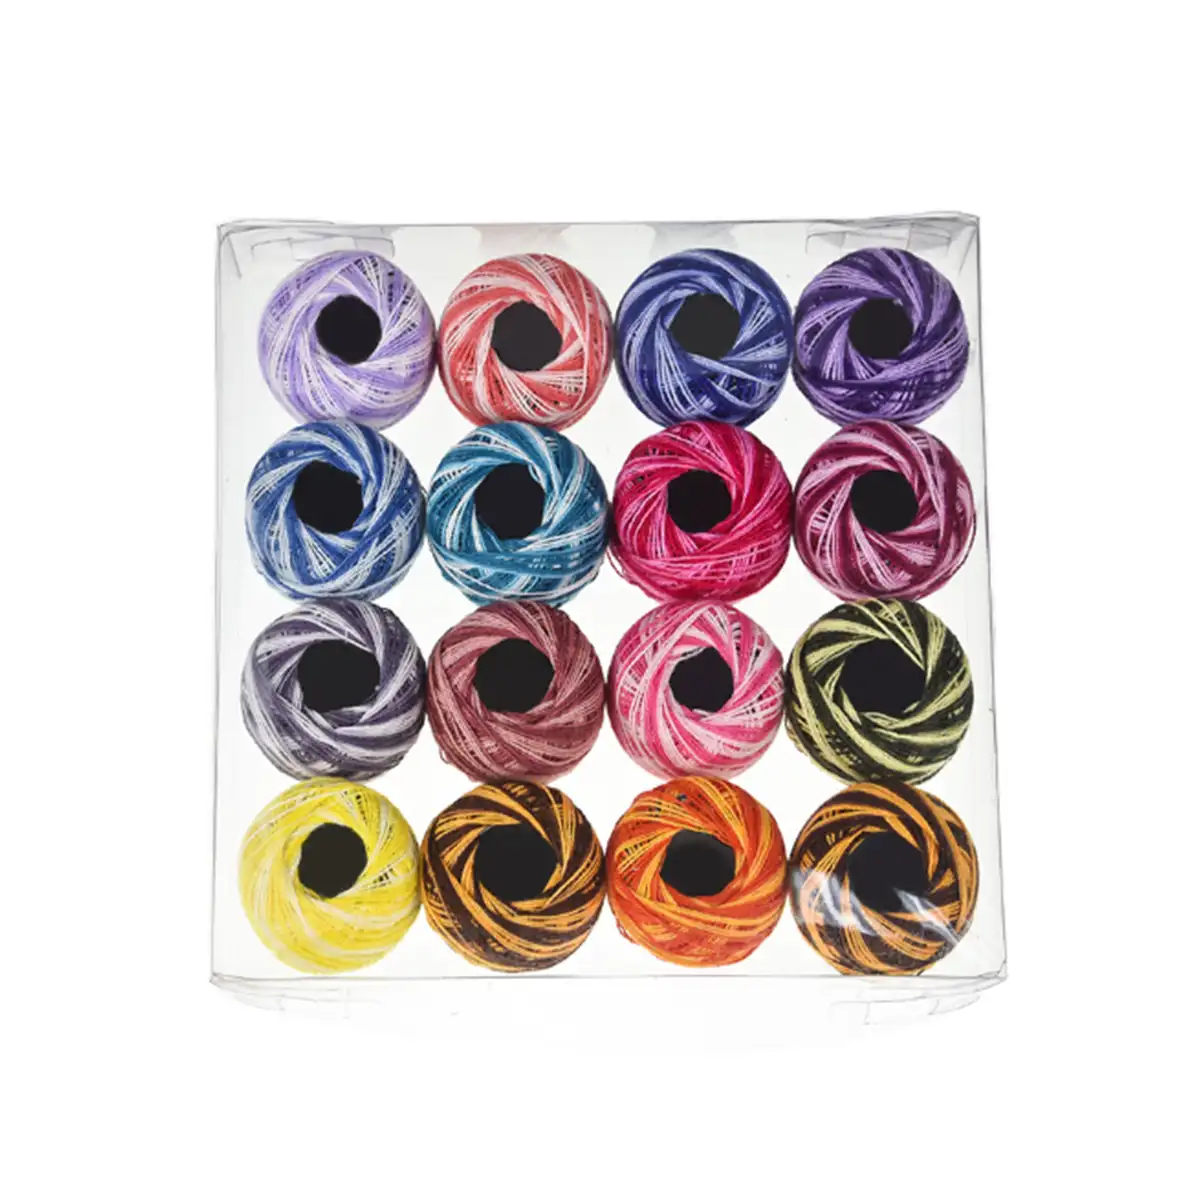 Charmkey hot selling 16 pcs set colorful lace yarn embroidery yarn thread cotton for crochet DIY cheap price with PVC case